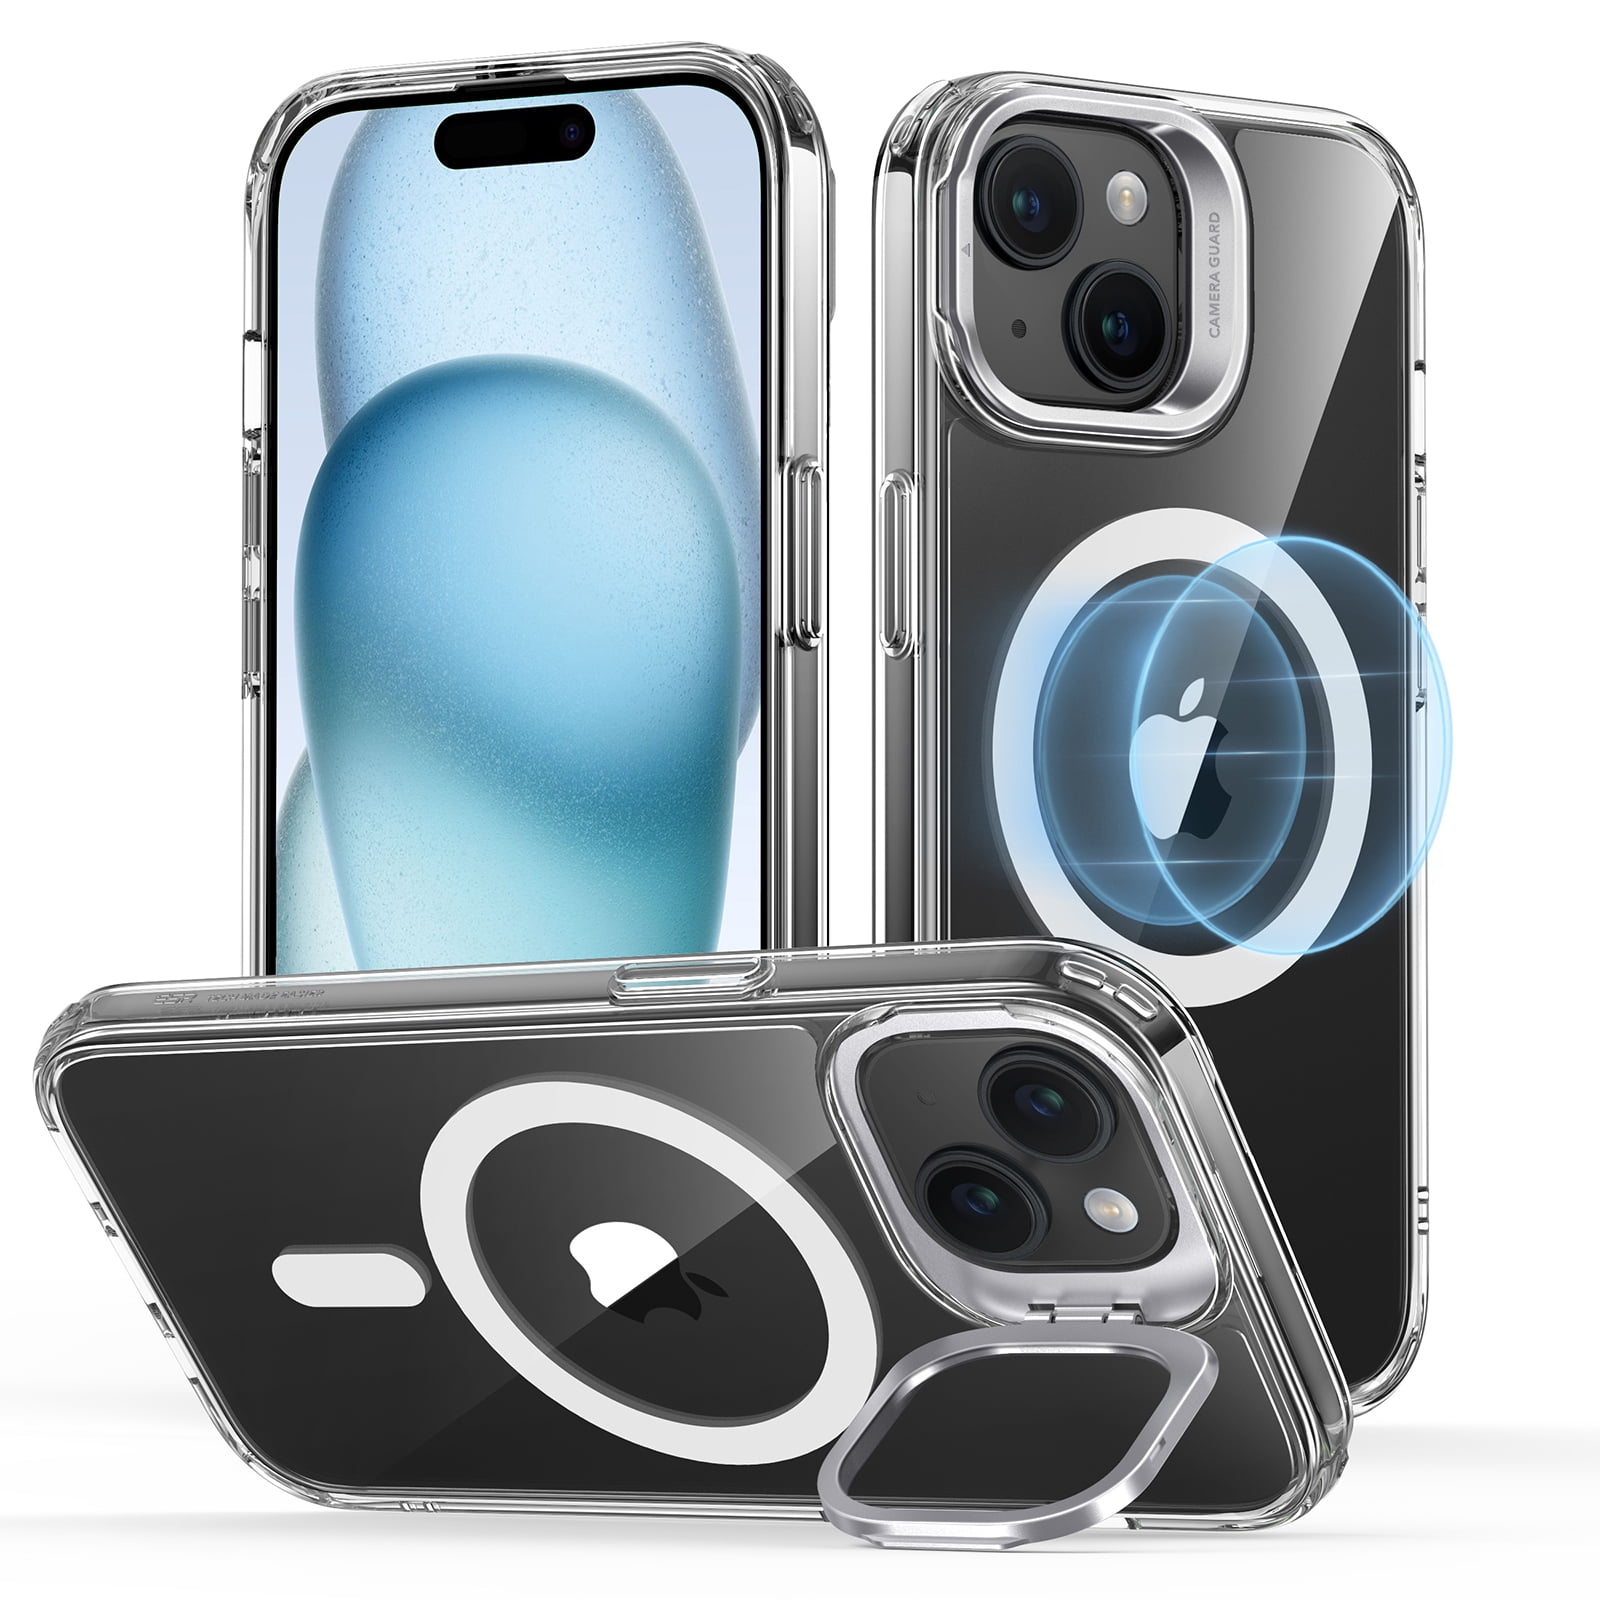 The ESR Hybrid Clear case with stand. : r/iPhone15Pro